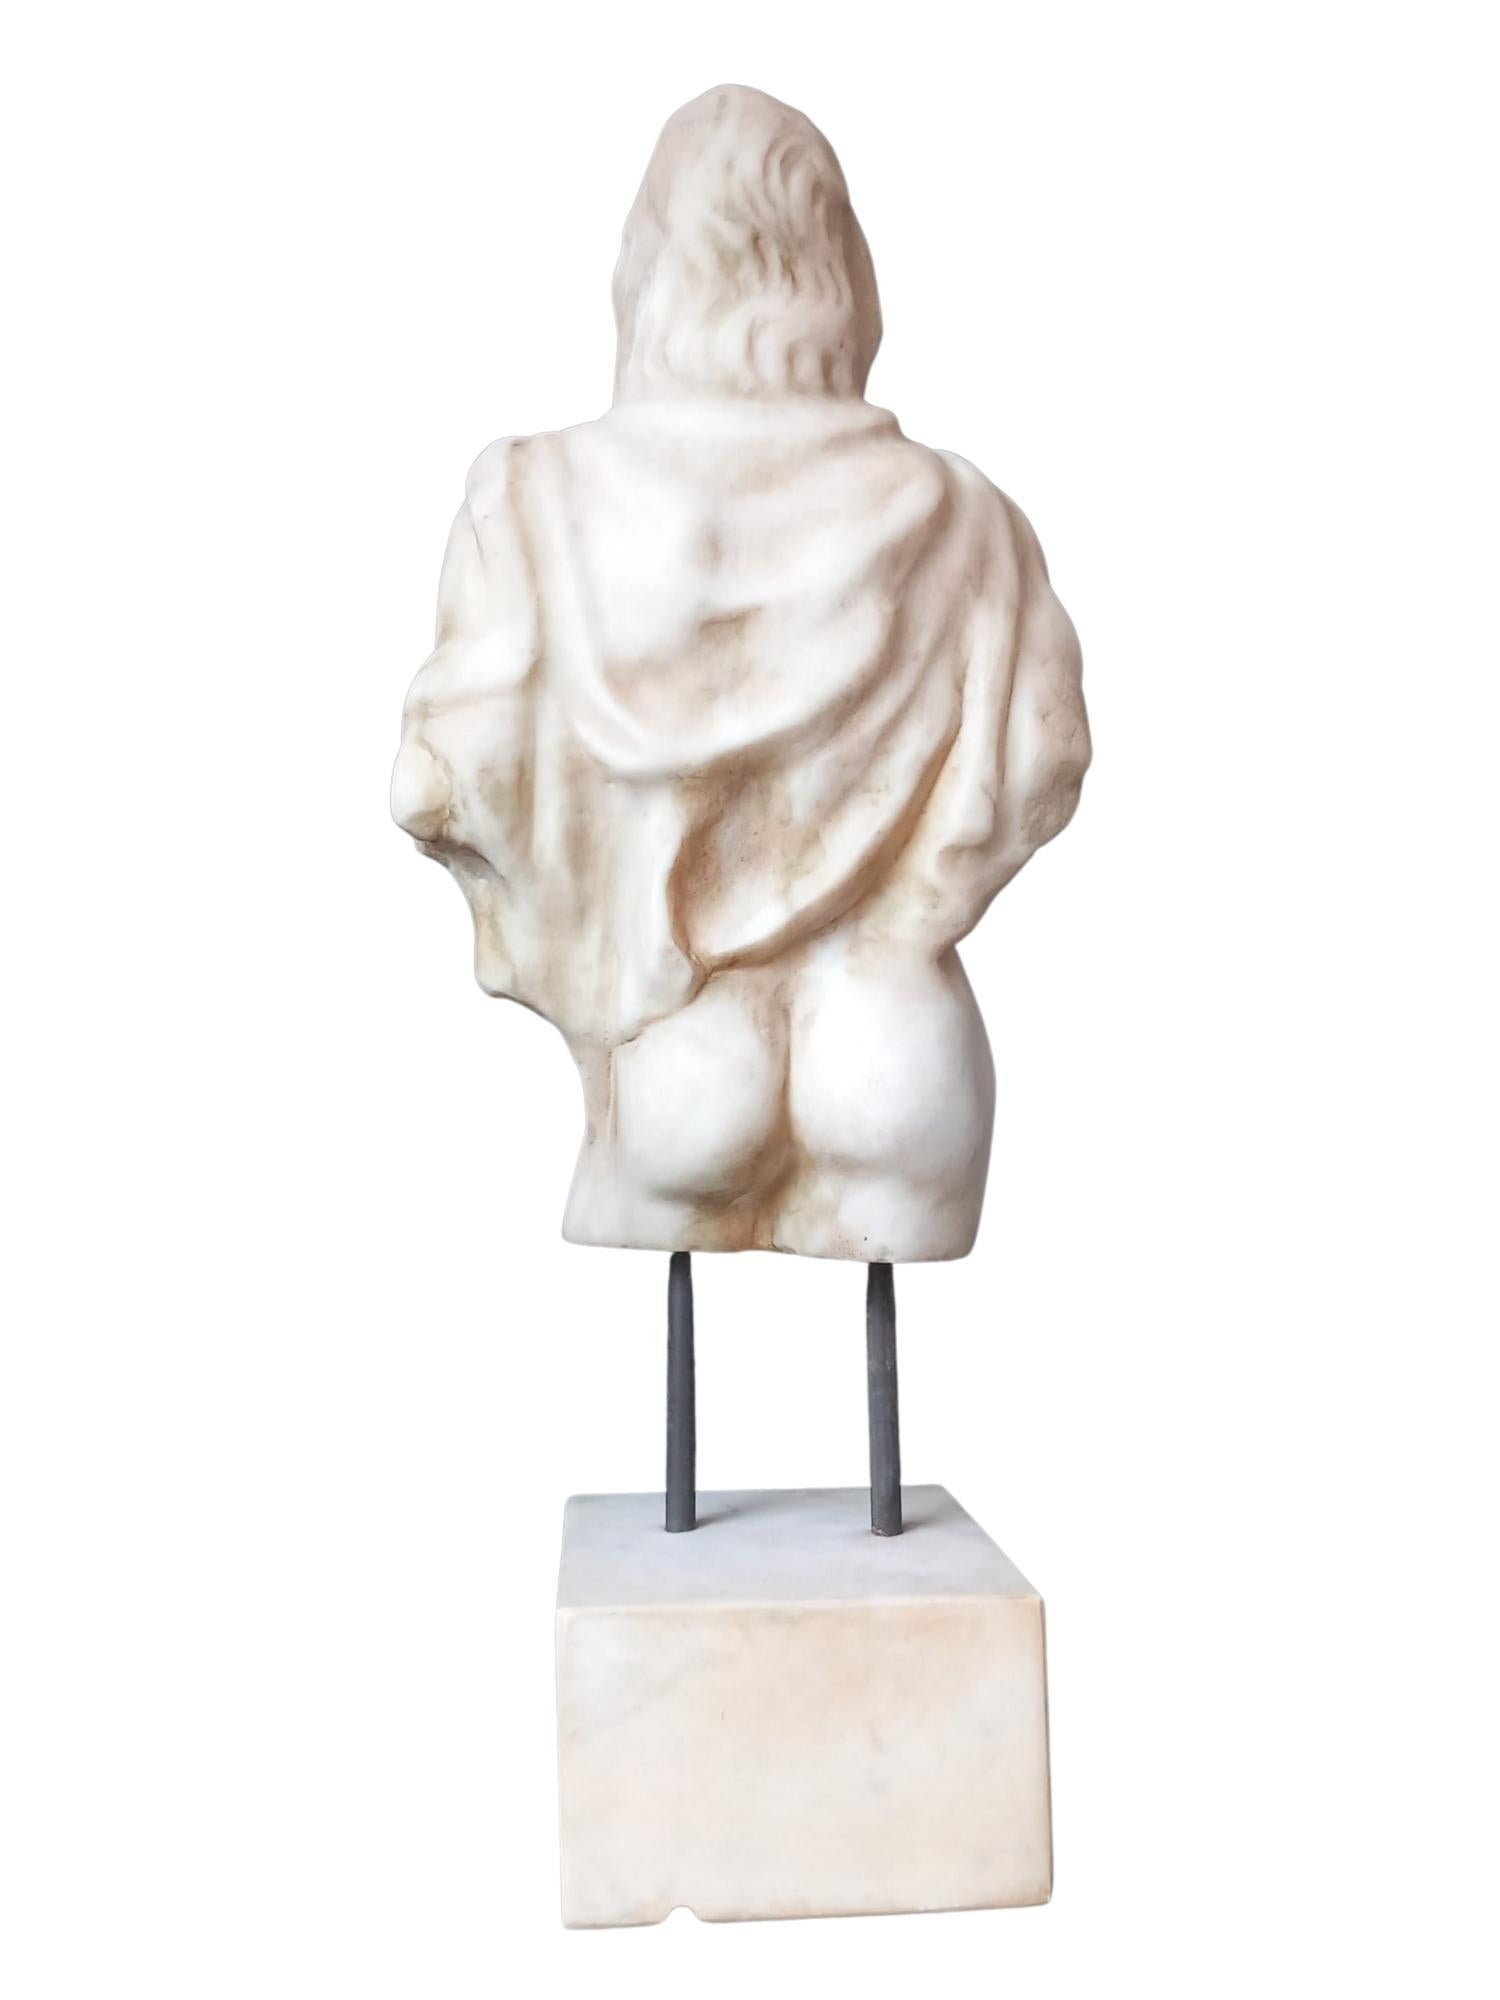 Refined torso statue of Ercole Massimo di Marco (Heracles for the Greeks) demigod hero endowed with exceptional strength. His labors became the symbol of the sacrifices that the exercise of virtue requires.Torso of Hercules in white Carrara marble,